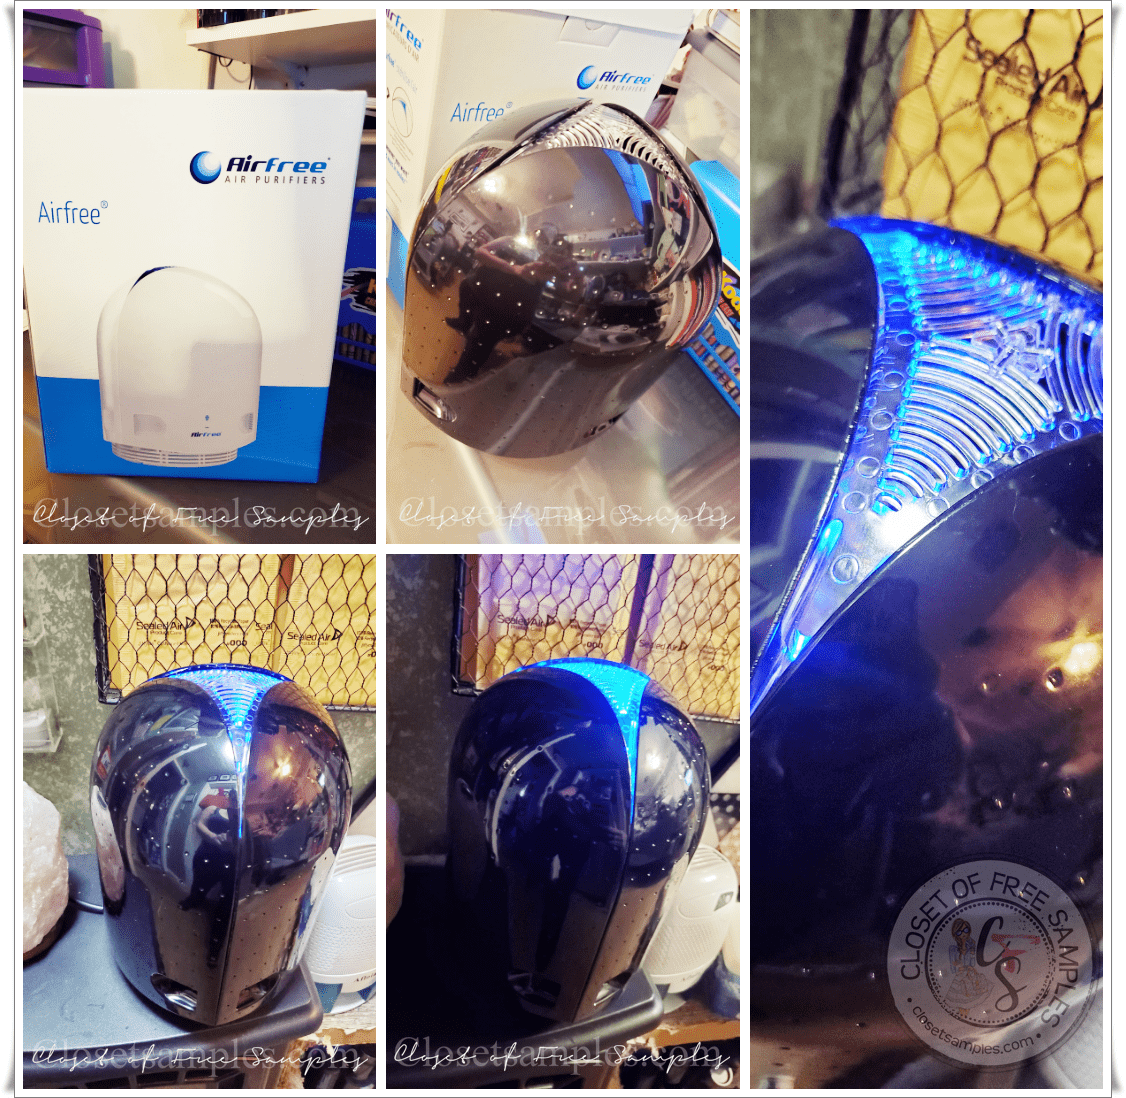 Airfree-Iris-3000-Silent-Filterless-Air-Purifier-and-Color-Changing-Nightlight-review-closetsamples-2.png